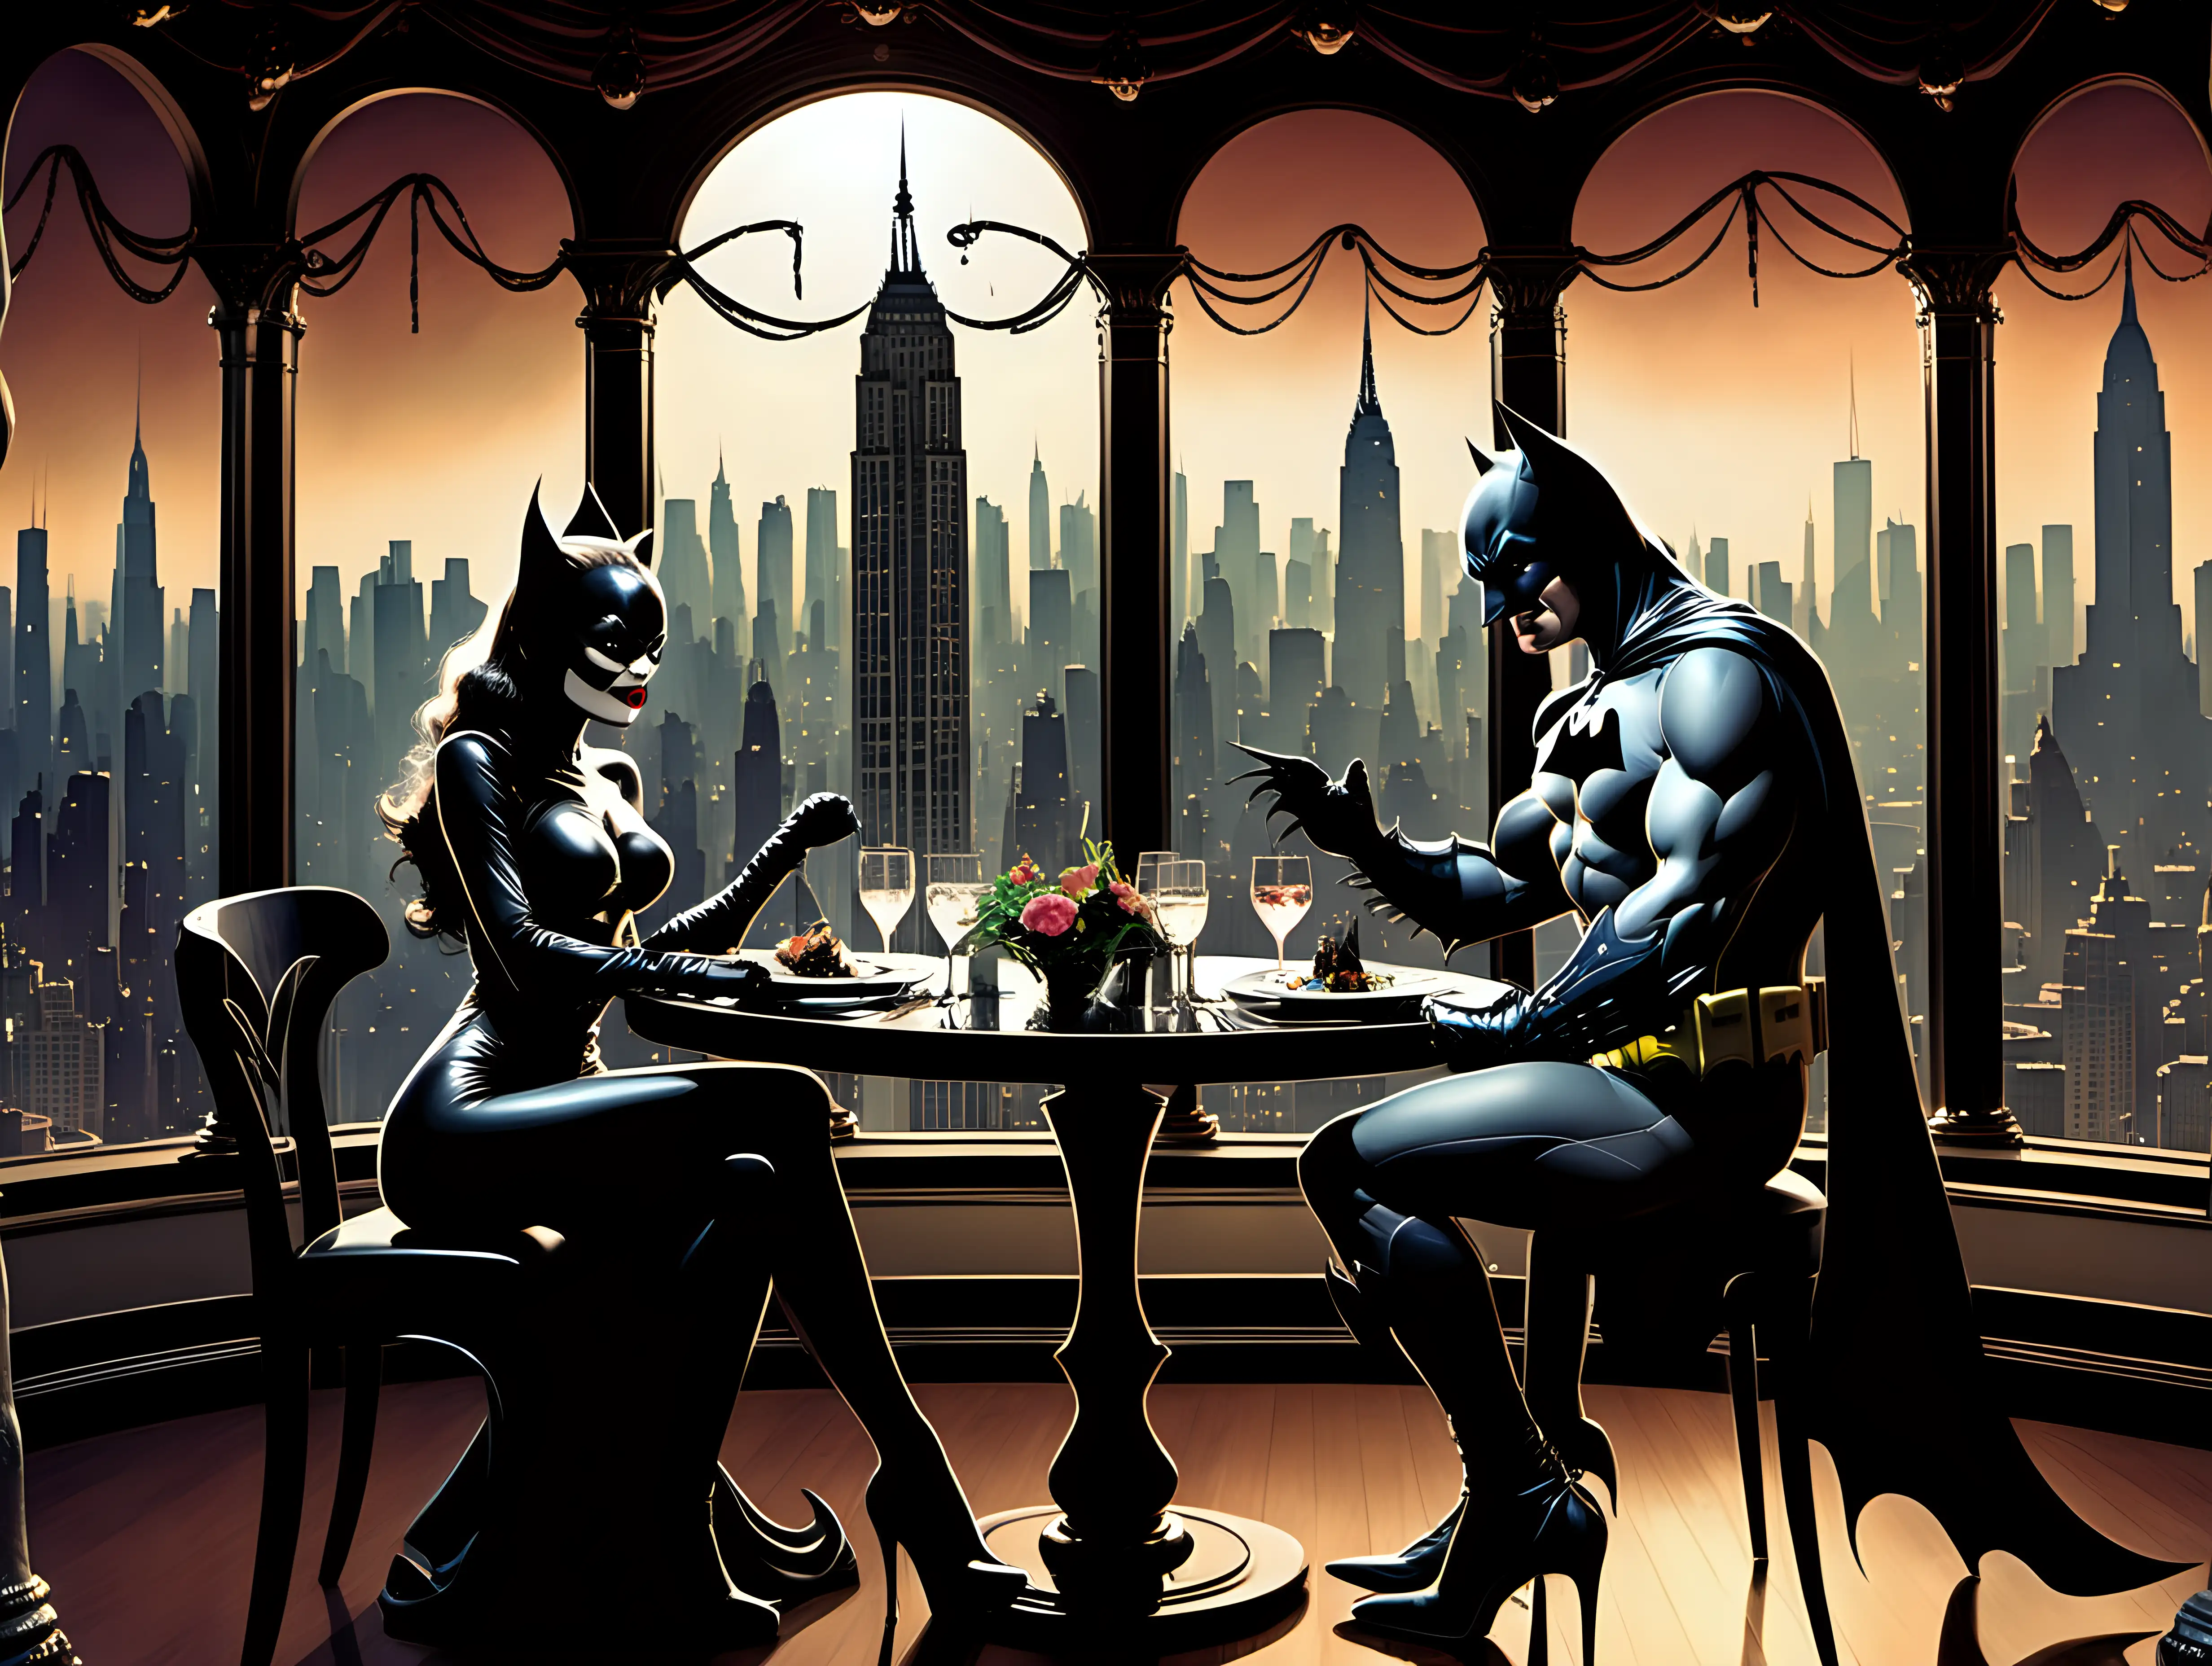 wide view Cat woman and Batman  on a date in a fancy restaurant overlooking NYC  Frank Frazetta style